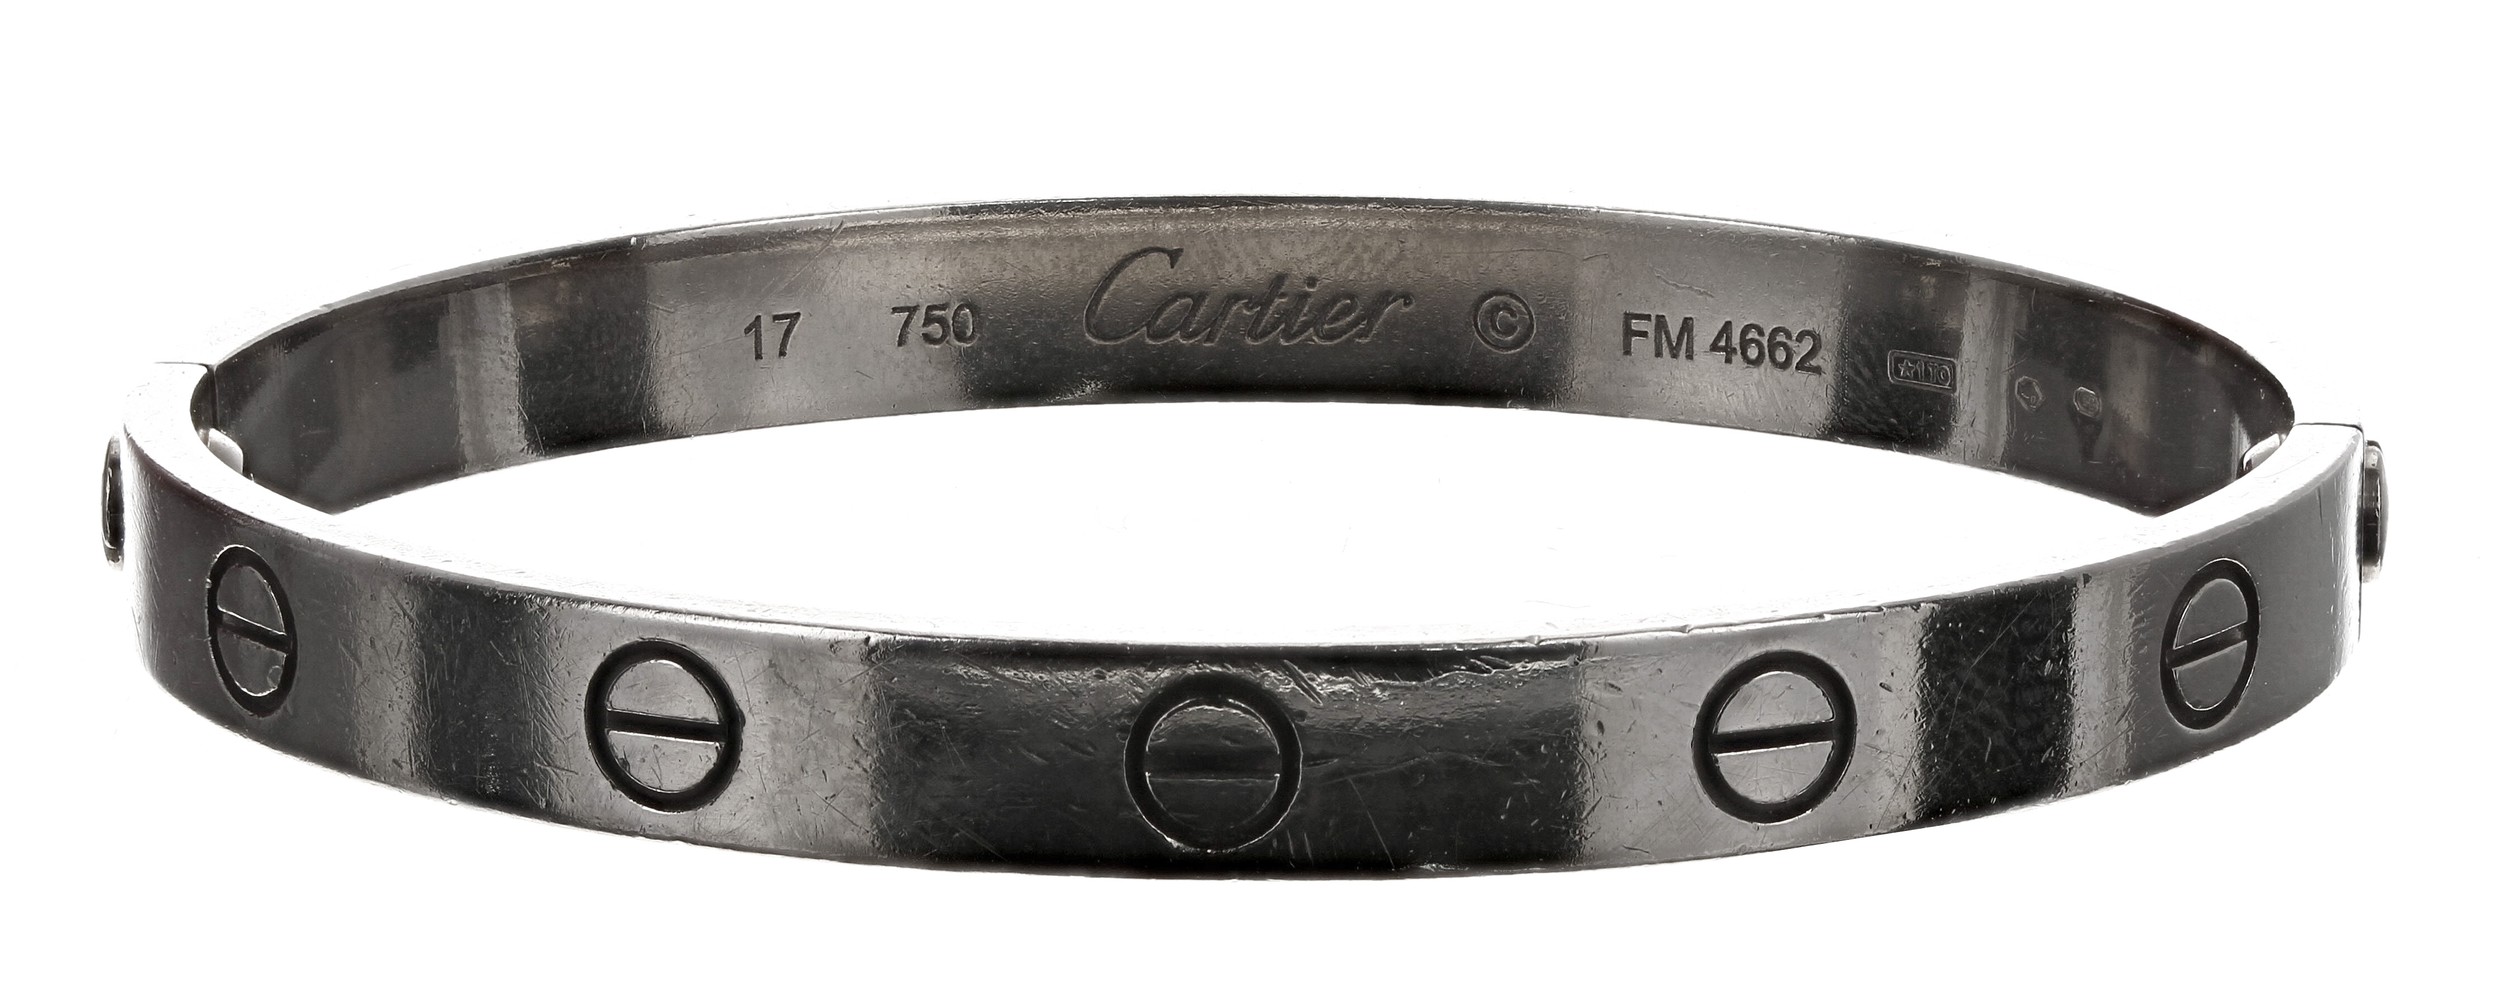 Cartier 18ct white gold 'Love' bracelet in the original box, signed, size 17, FM4662, 33.9gm (23) ** - Image 2 of 2